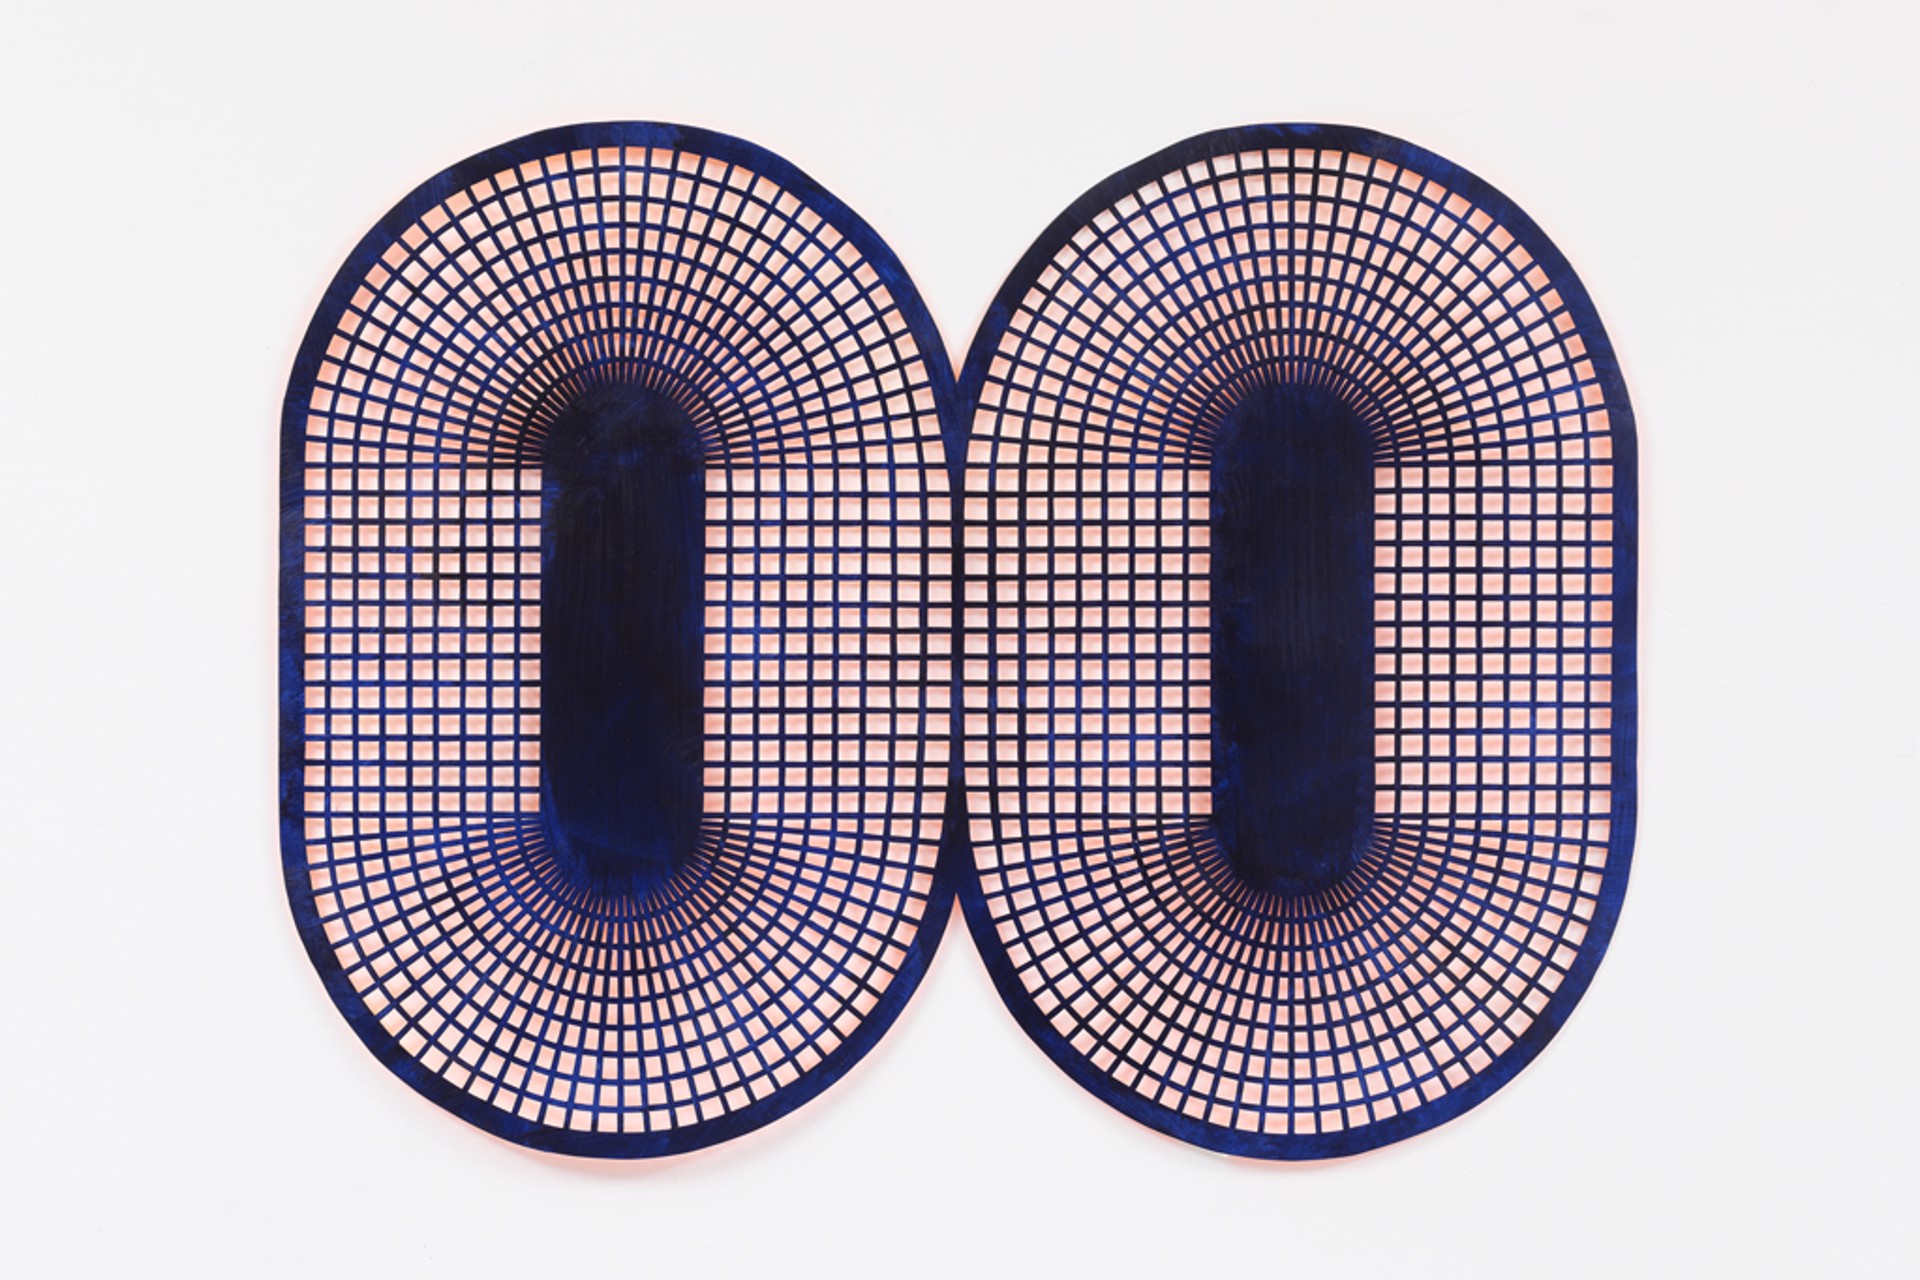 Untitled (Double Navy) by Leigh Suggs